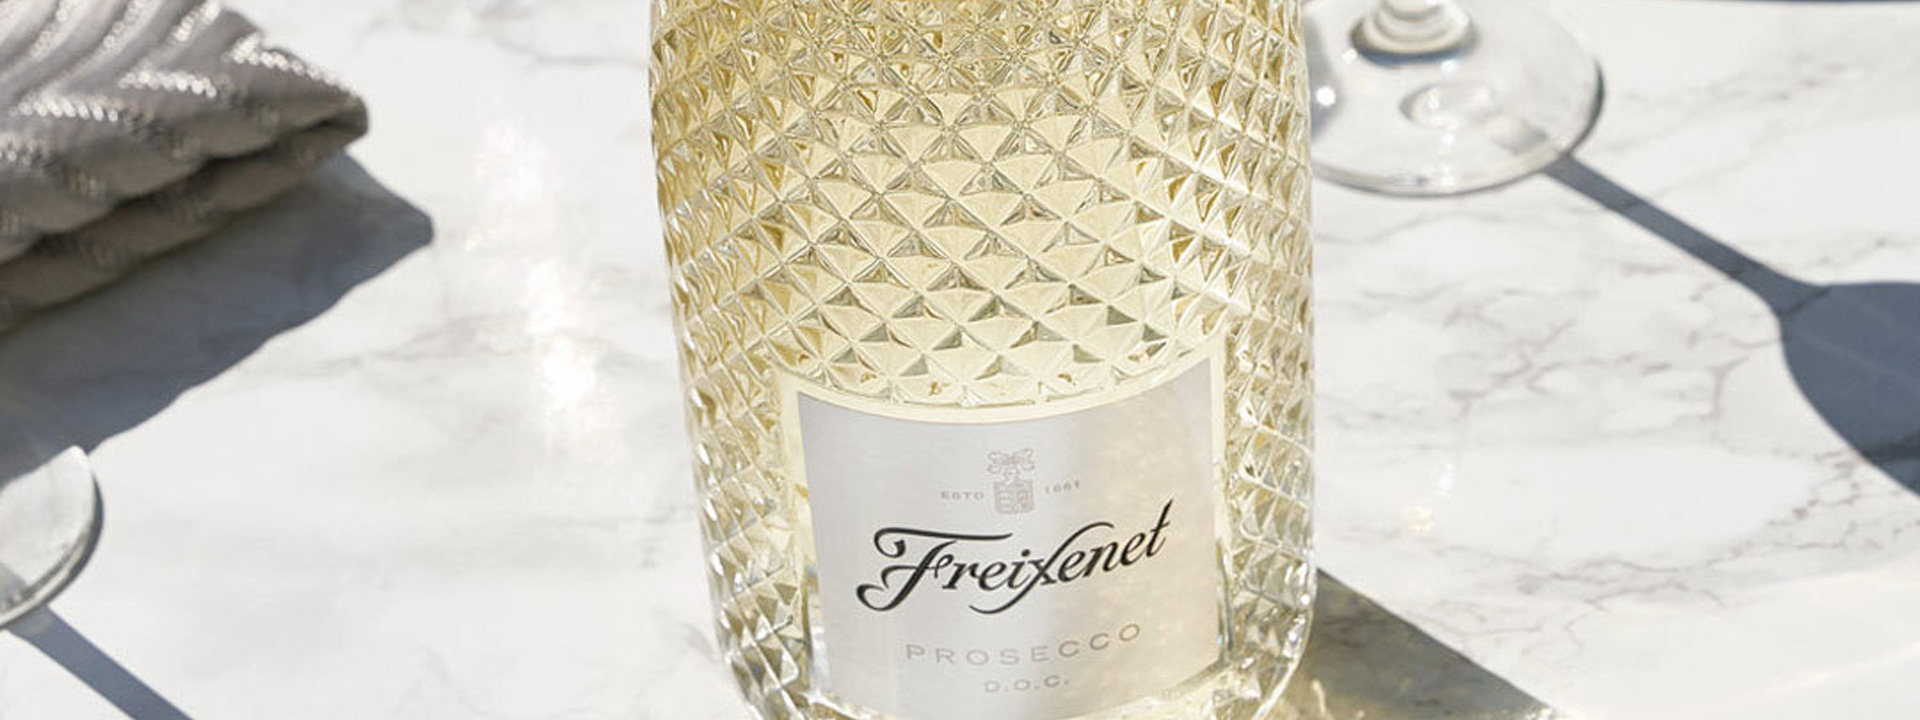 Category image for Prosecco